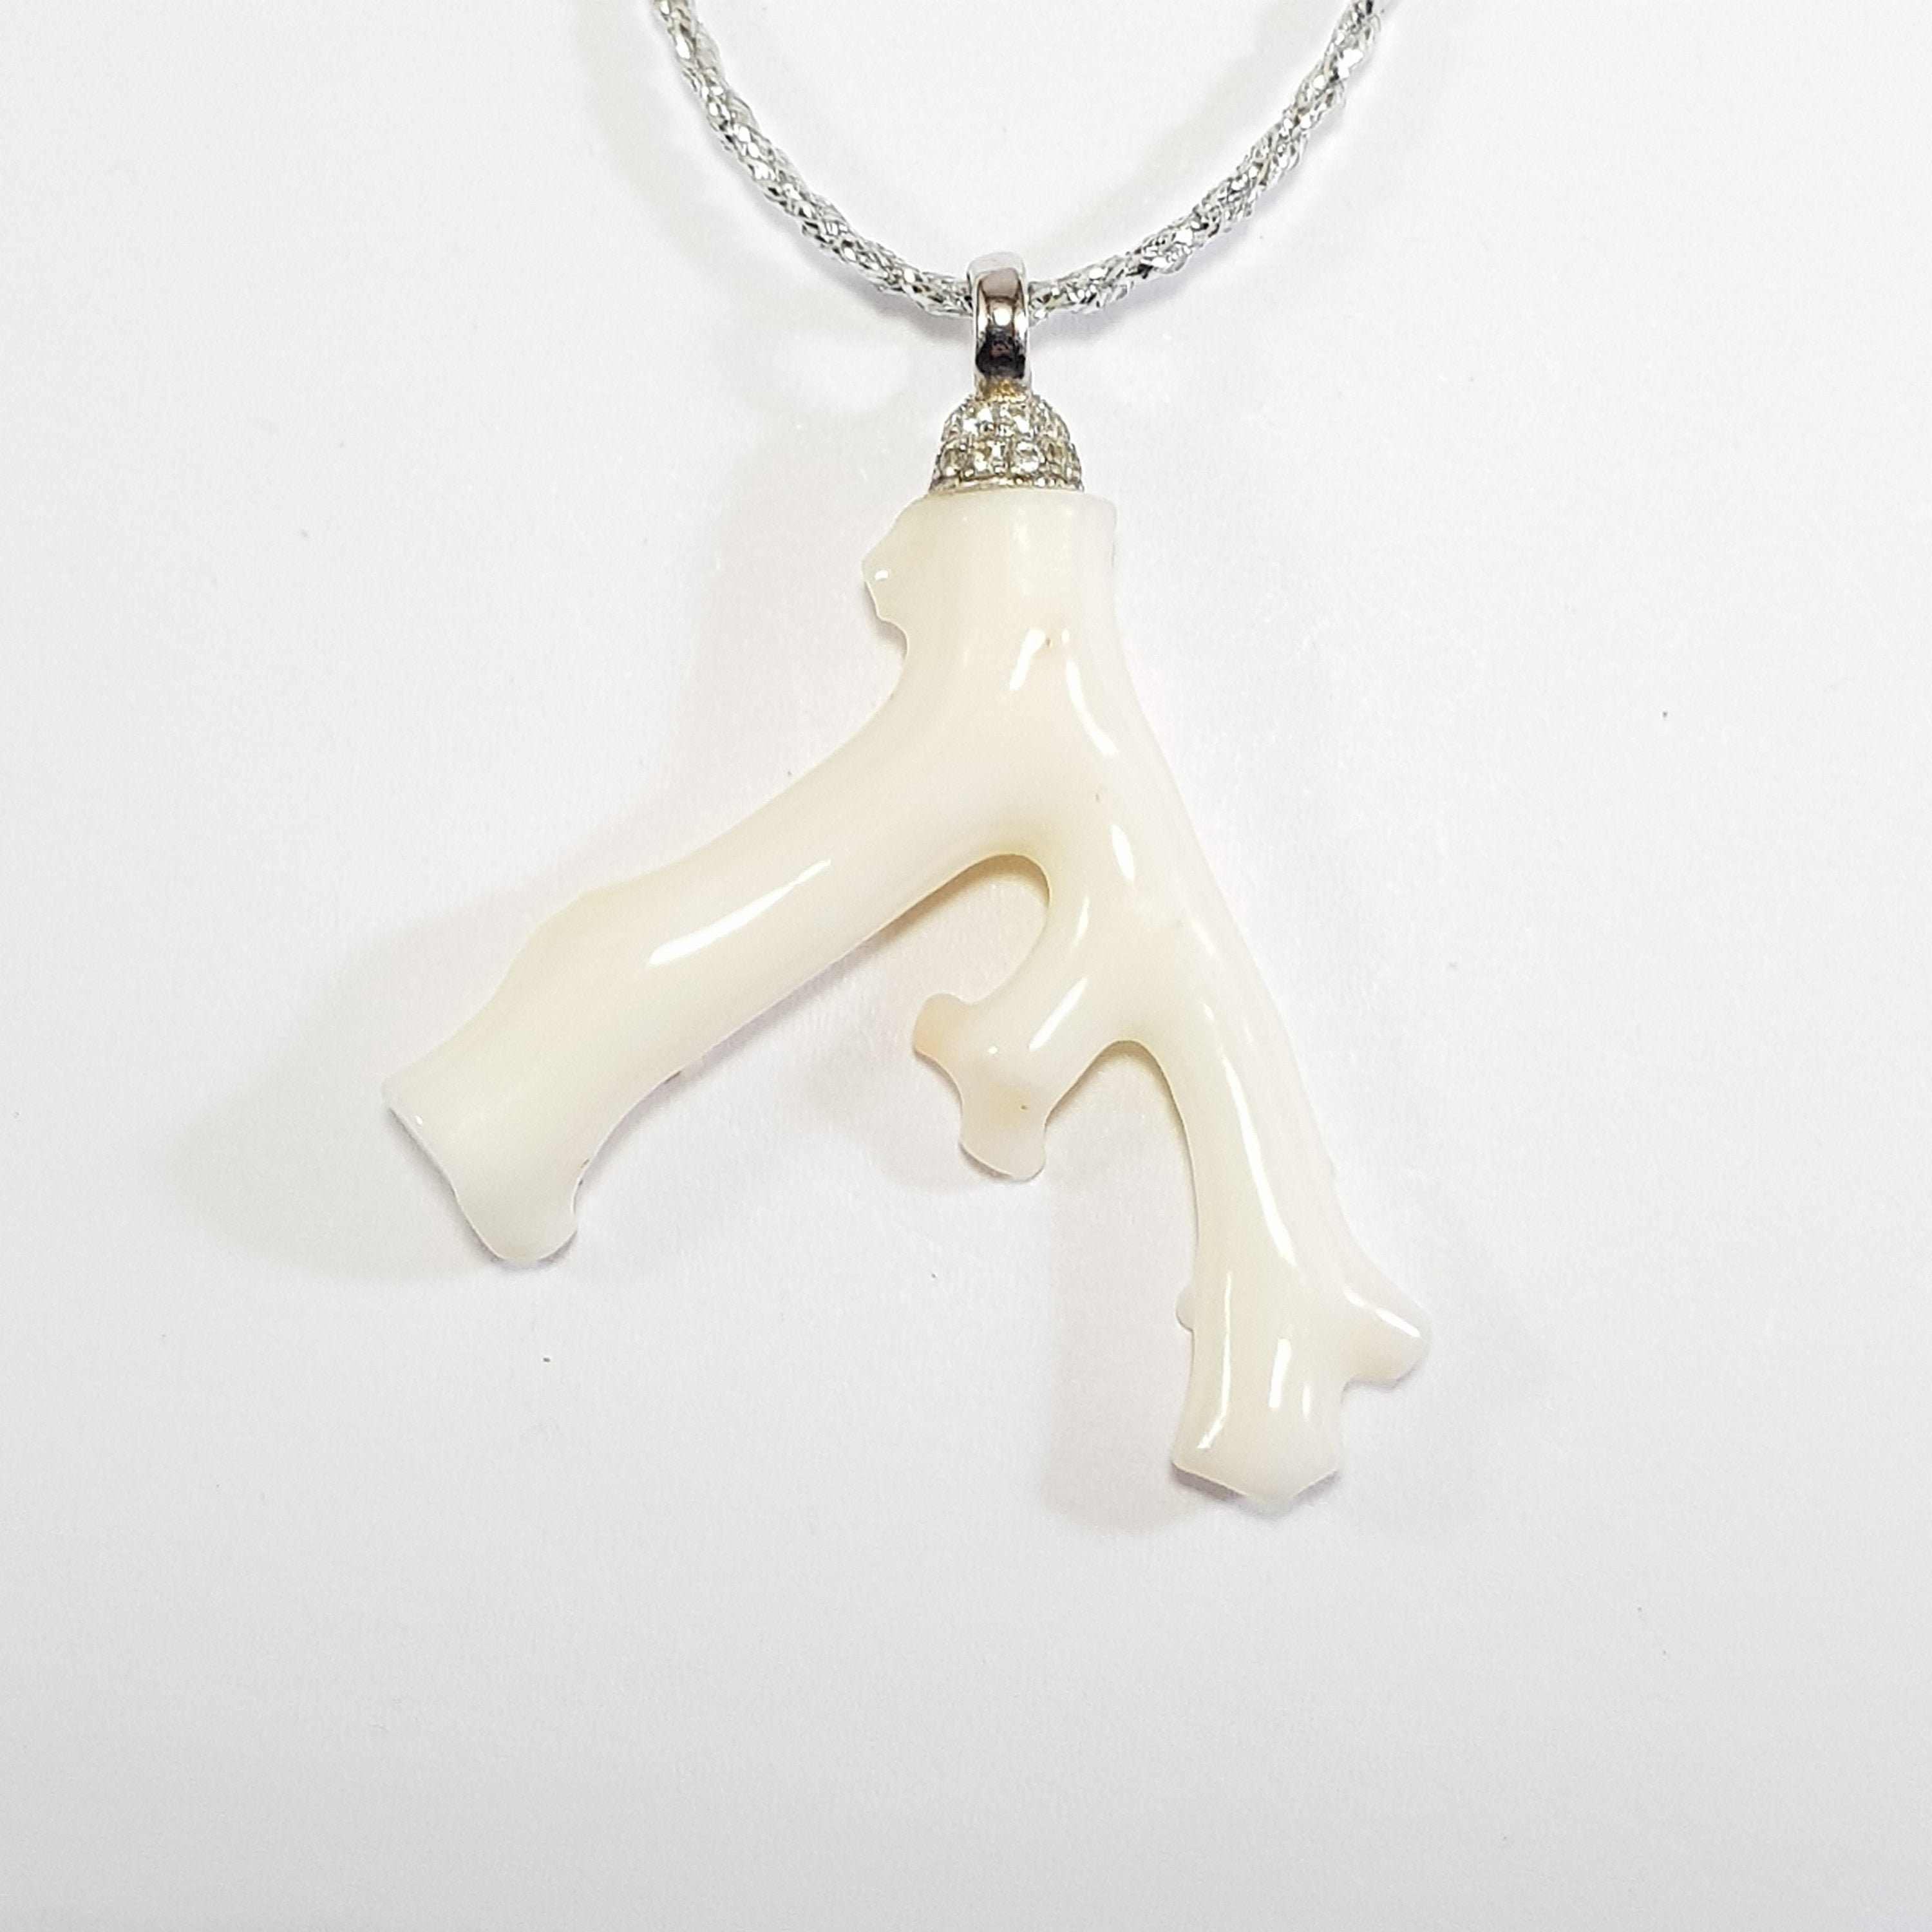 White Coral Branch Pendant Good Luck Handmade MieleCorals Italian Jewelery  Genuine Not dyed (NO-BAMBOO) Certificate